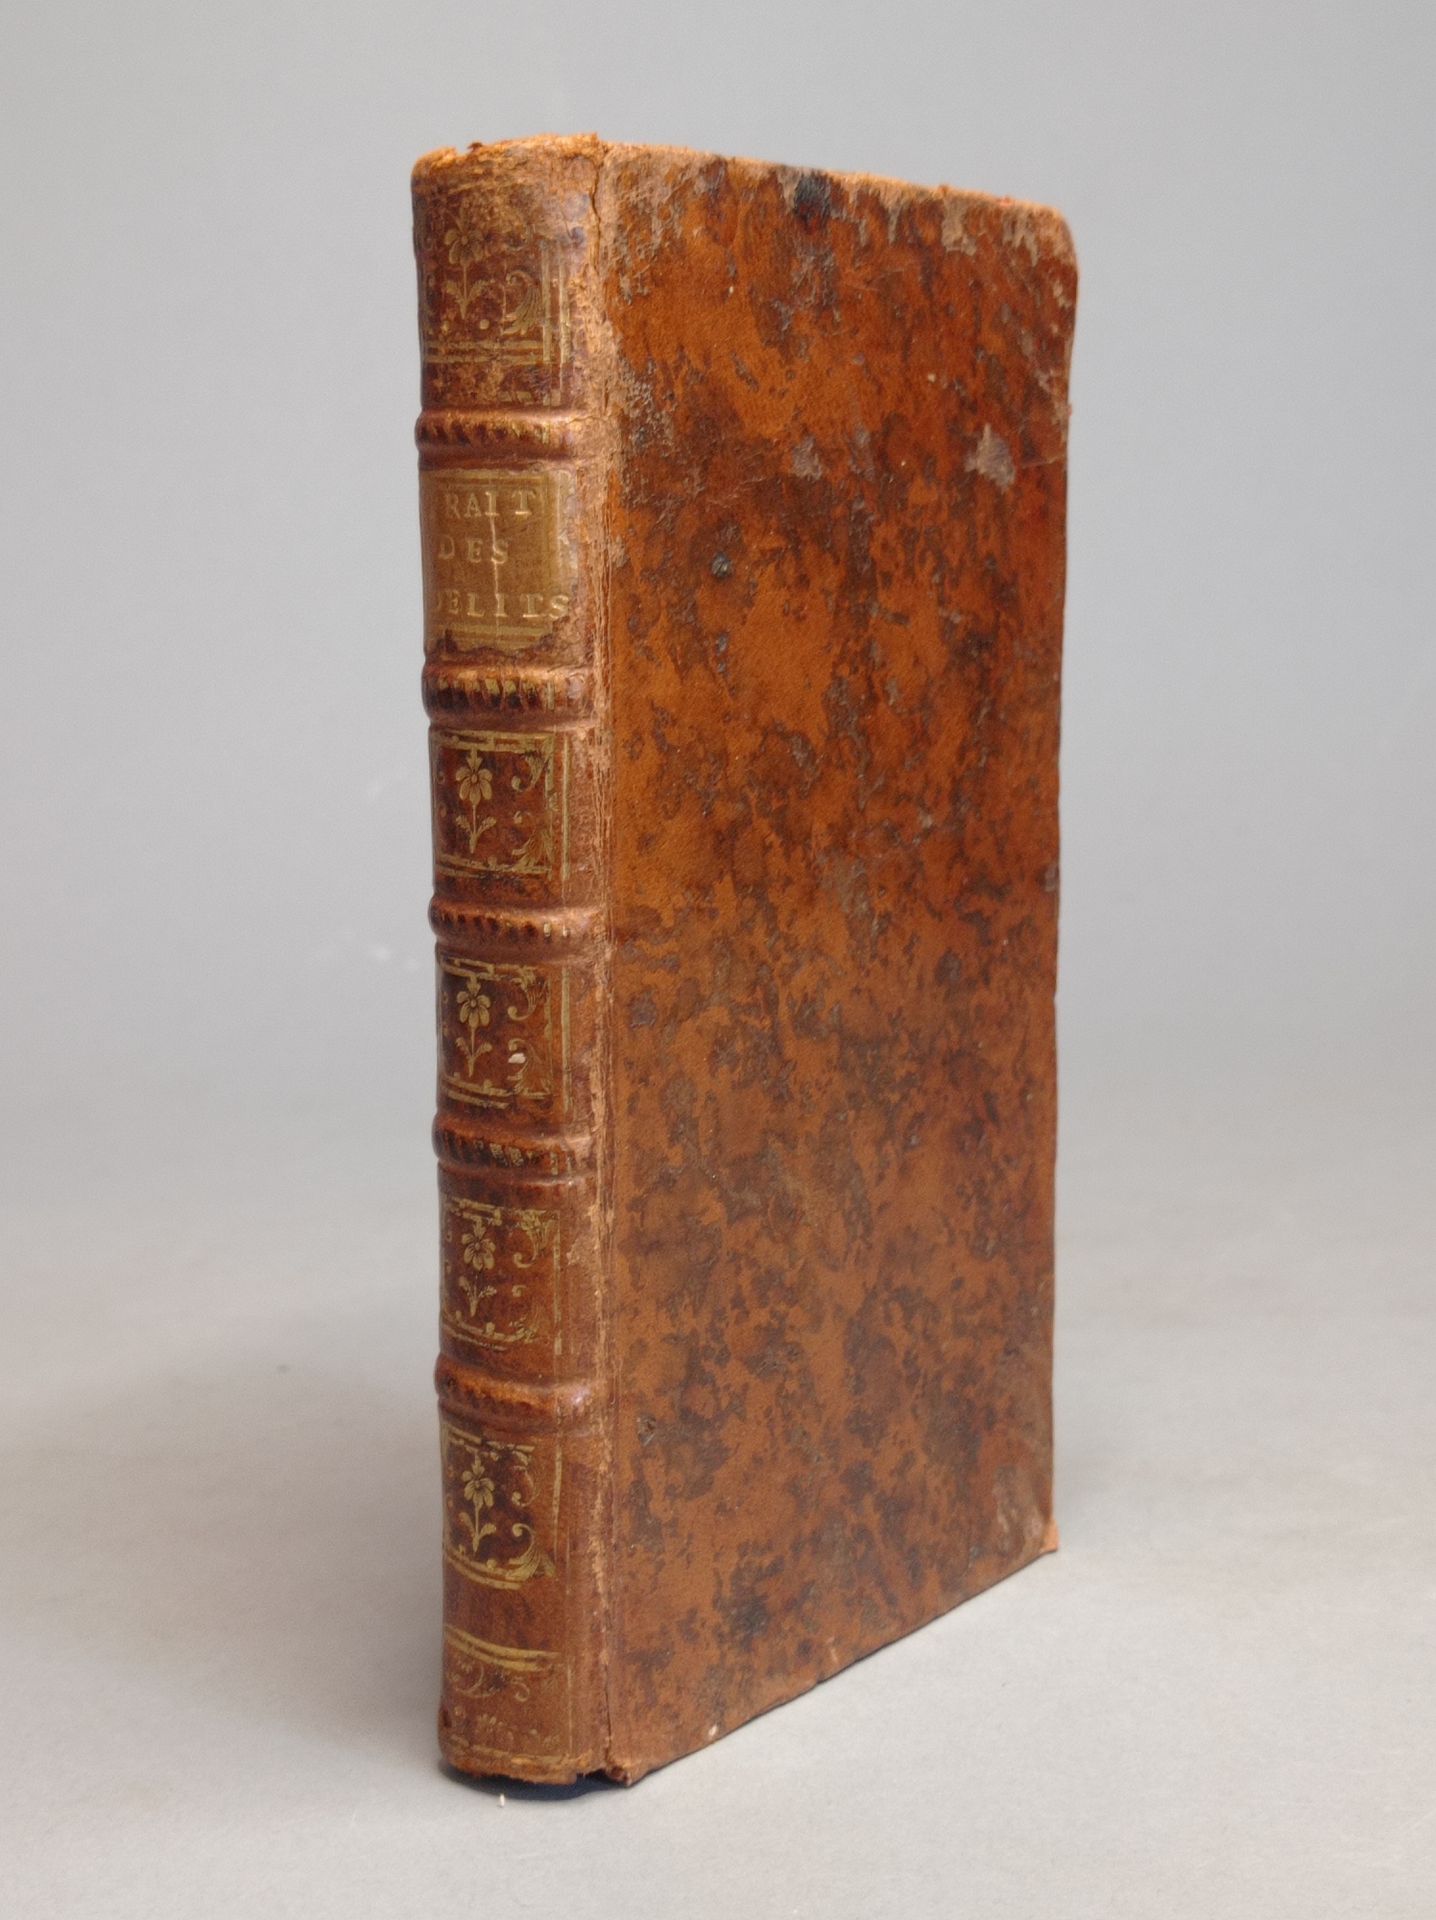 Null [BECCARIA (Cesare). Treatise on offenses and penalties. Philadelphia, 1766.&hellip;